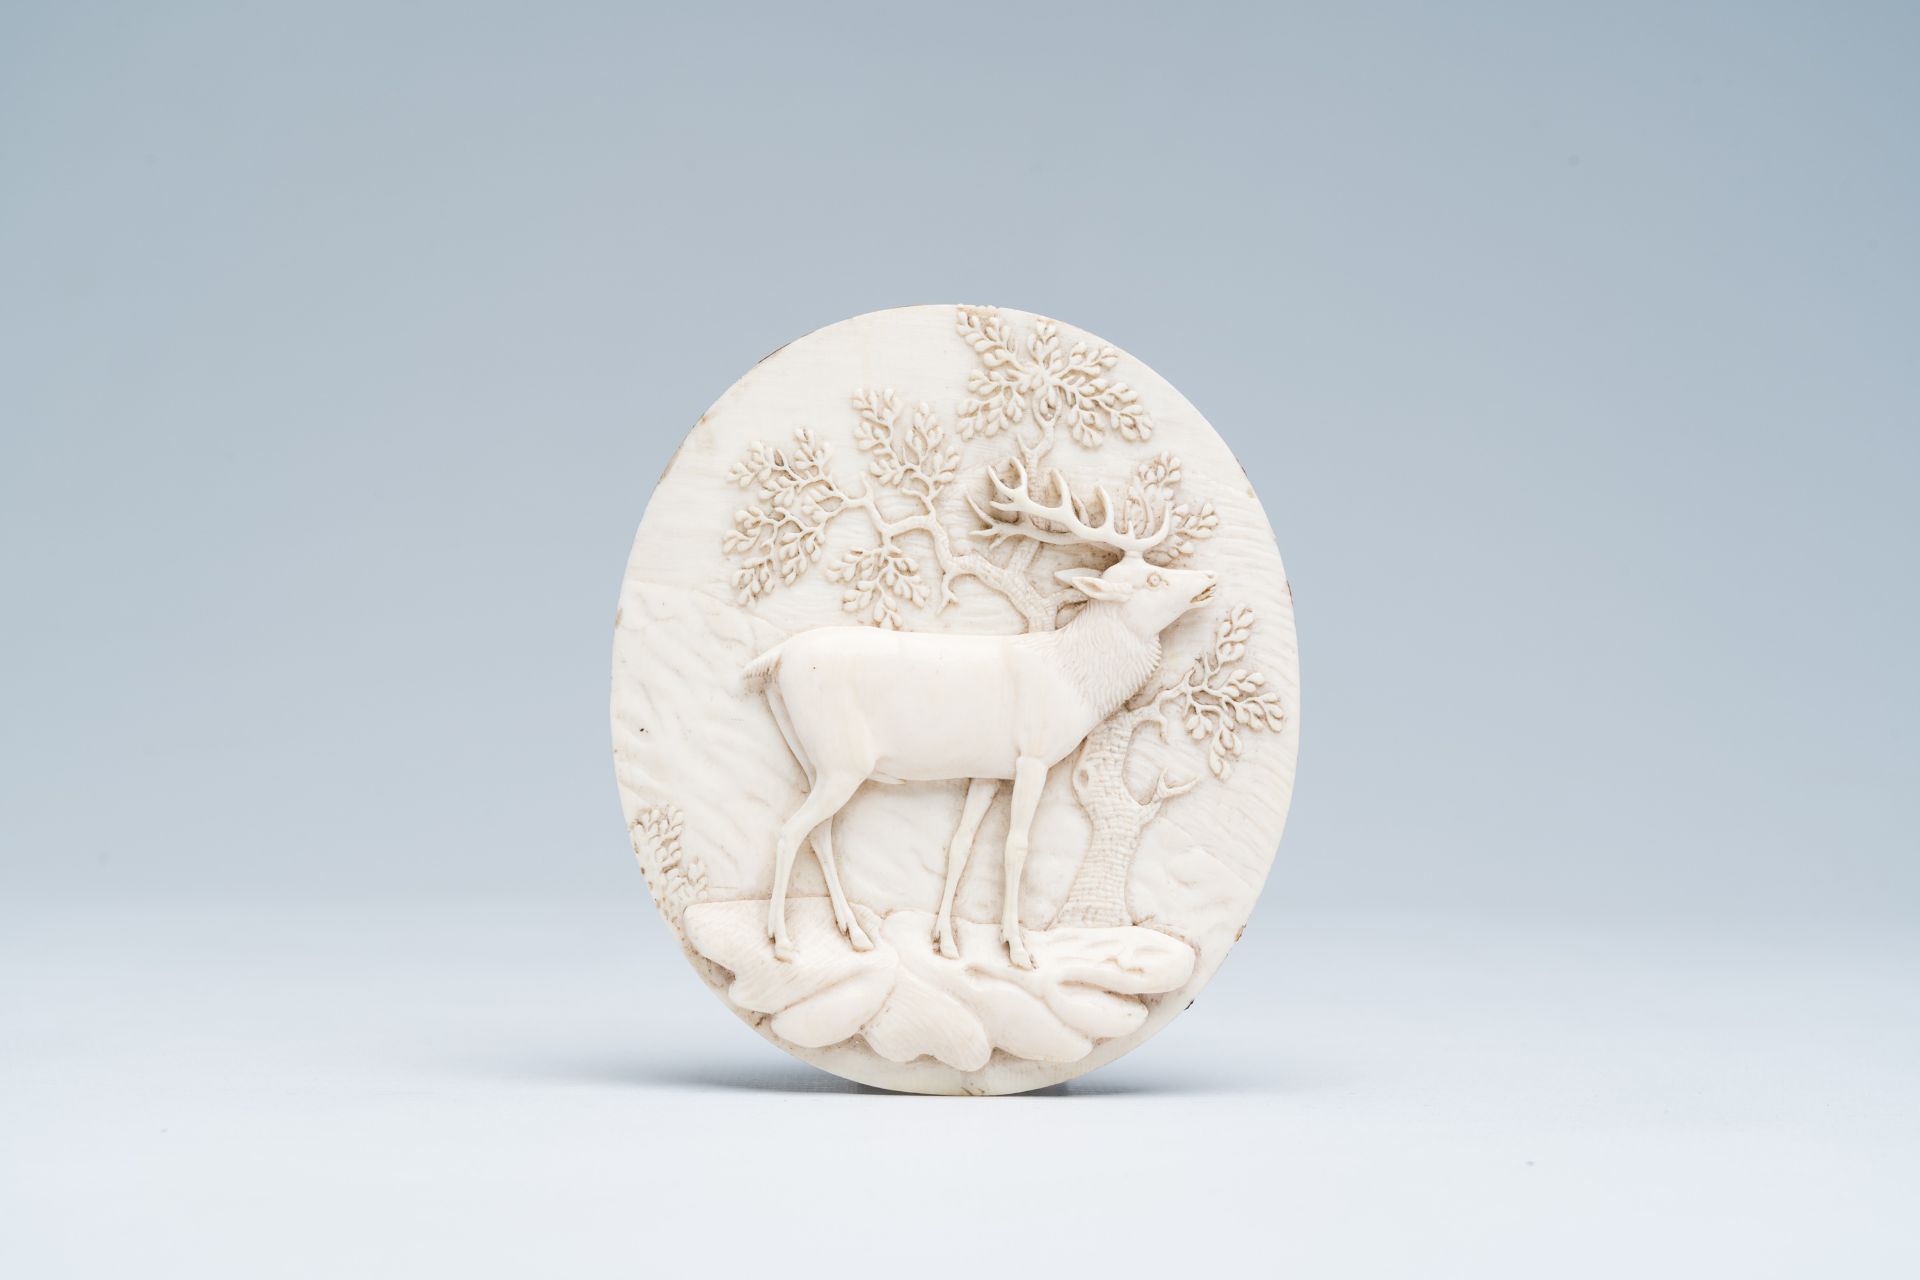 A German or Austrian basso relievo ivory plaque with a deer on a rock in a forest, late 19th C.